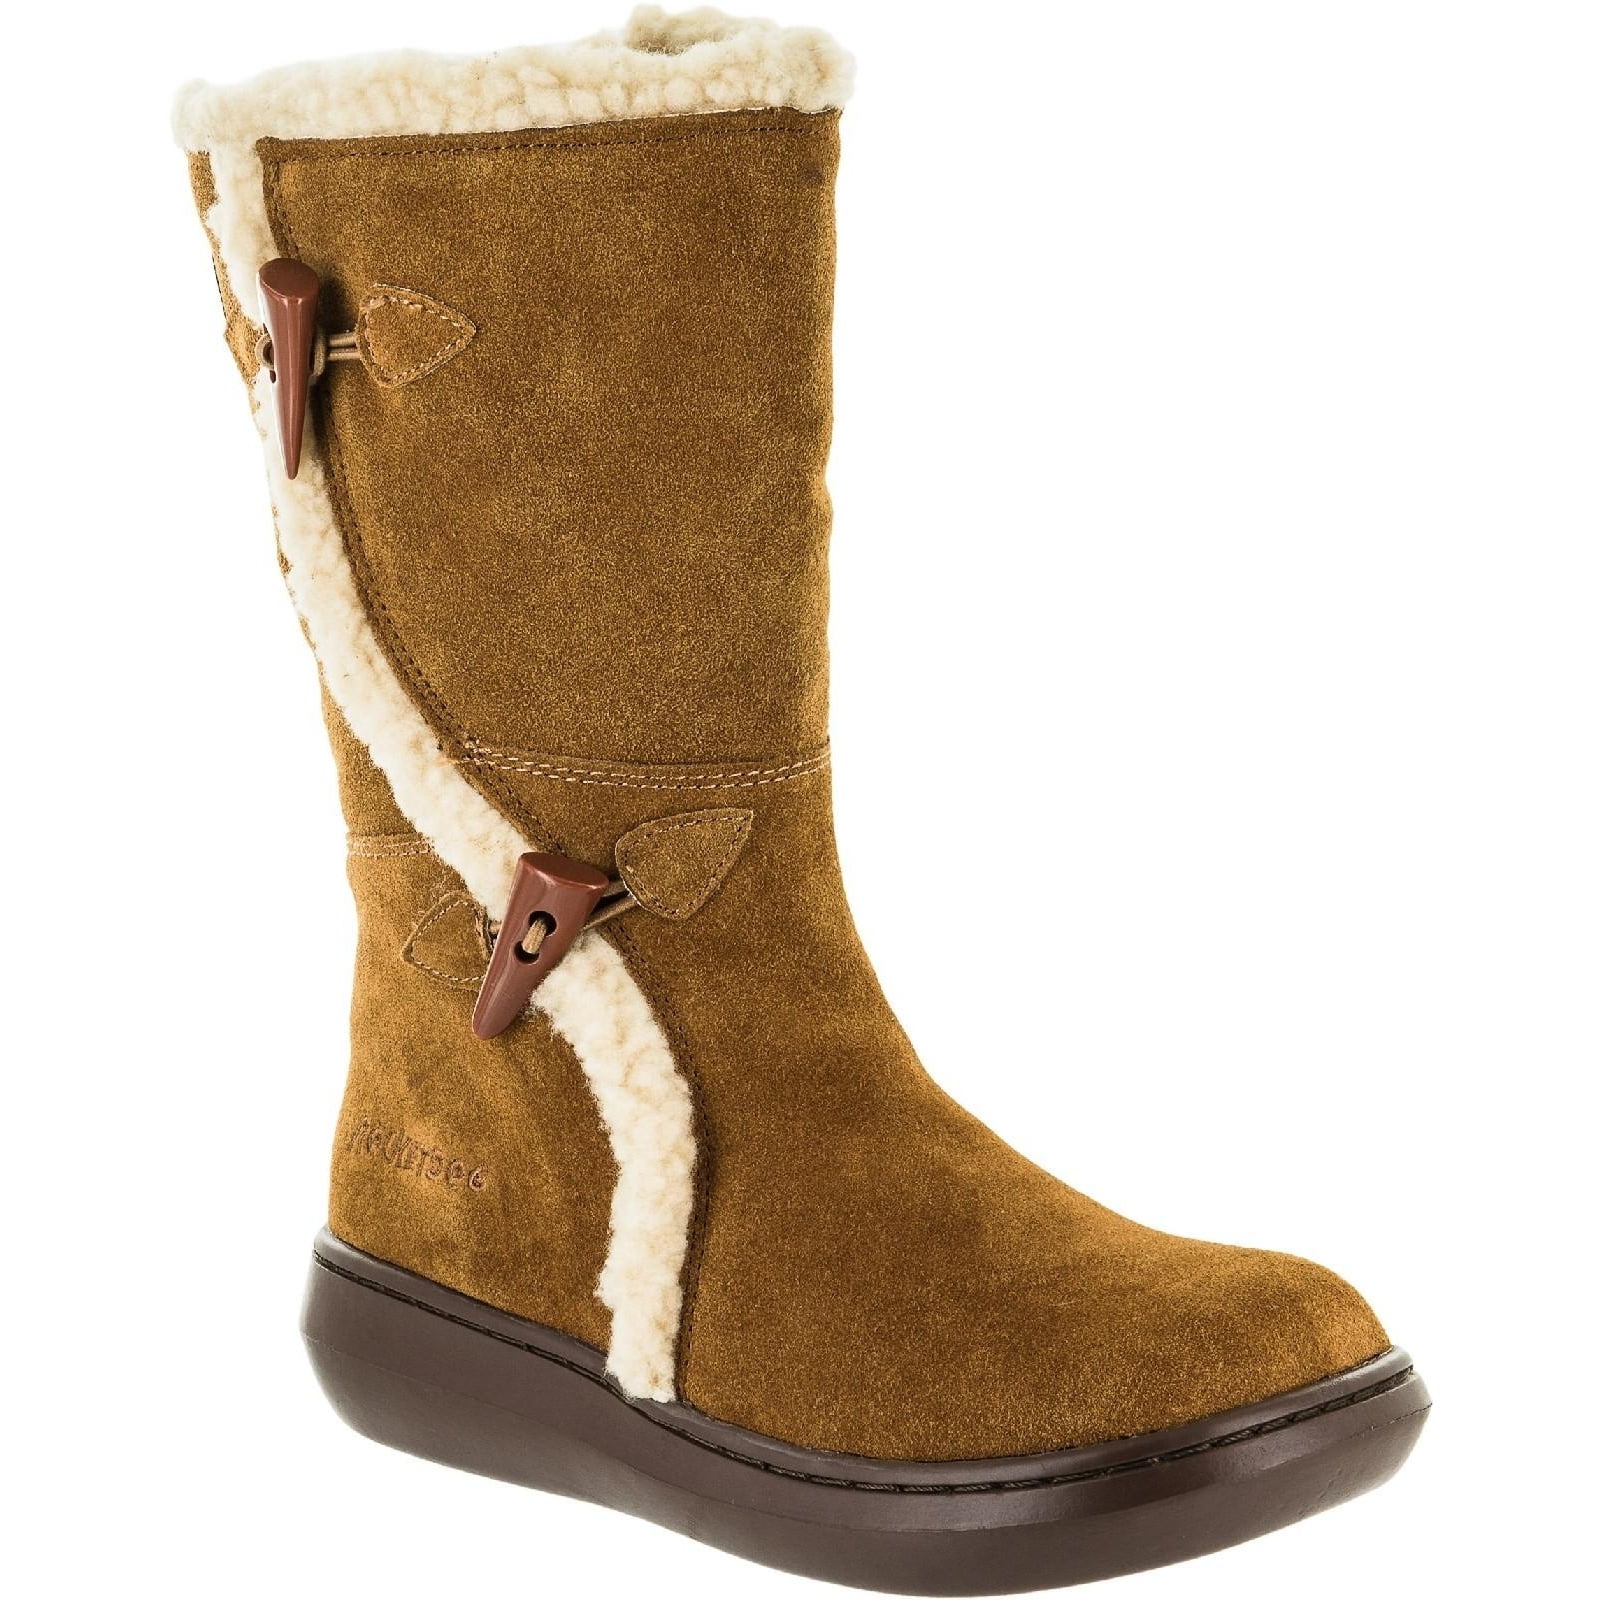 Rocket Dog Womens Staples Suede Winter Boots 